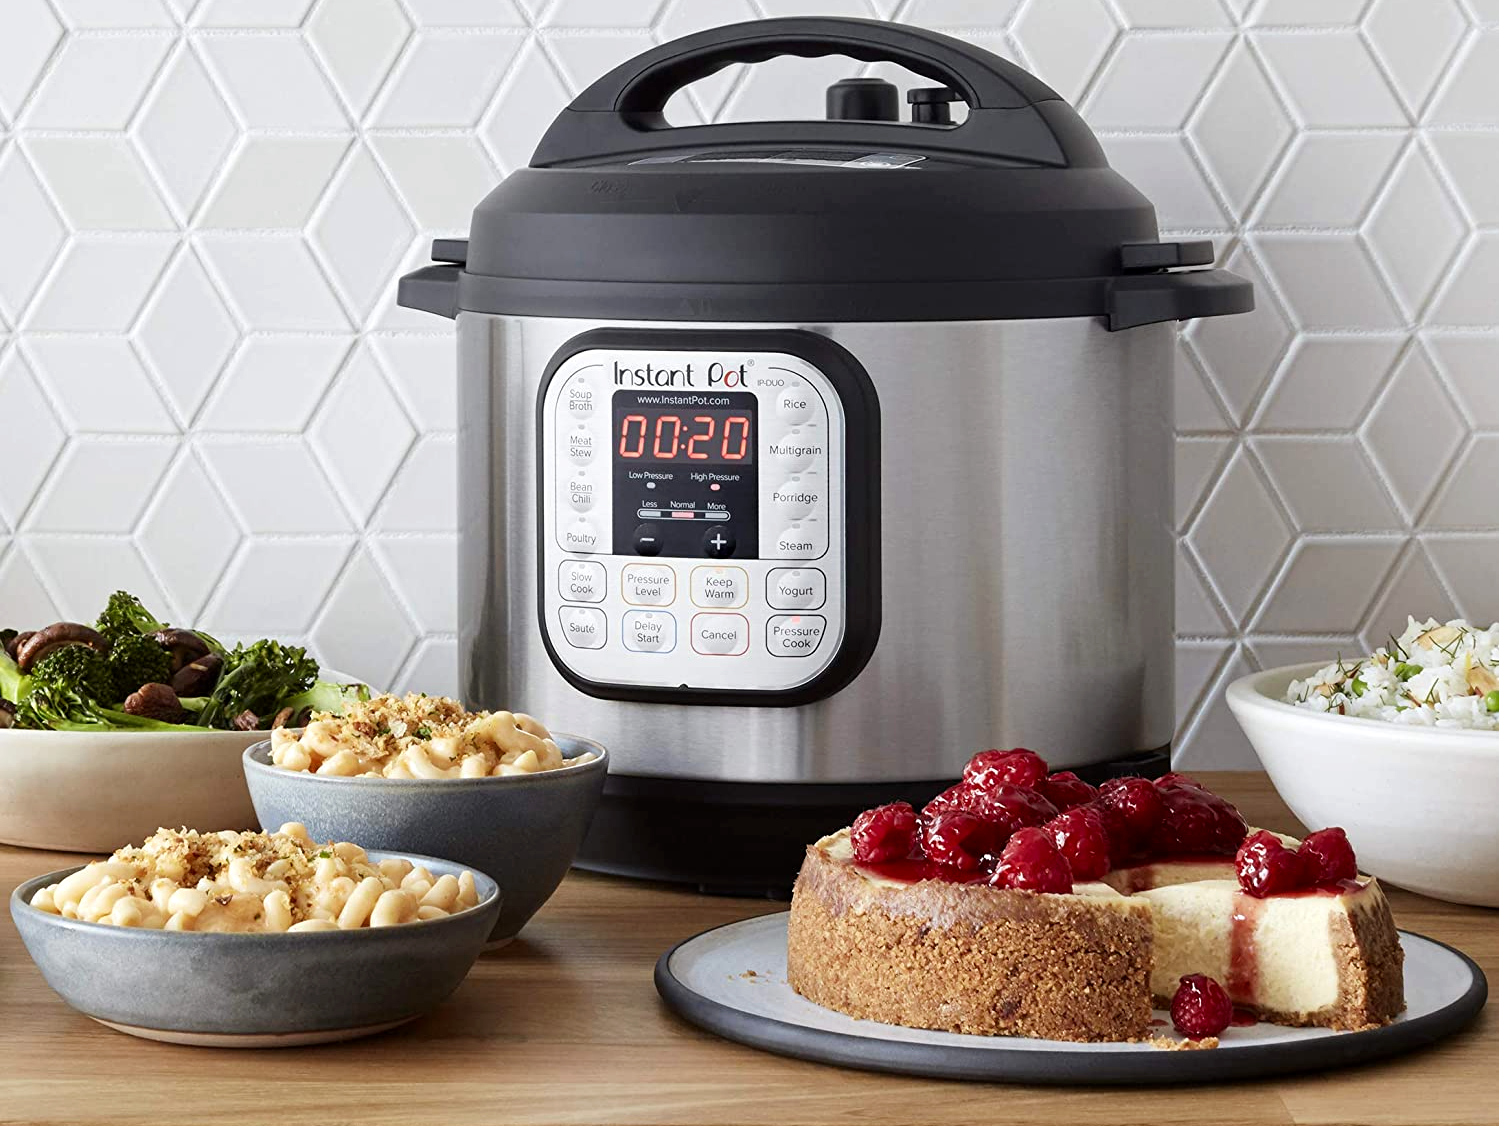 Should You Buy an Instant Pot on Black Friday 2021?